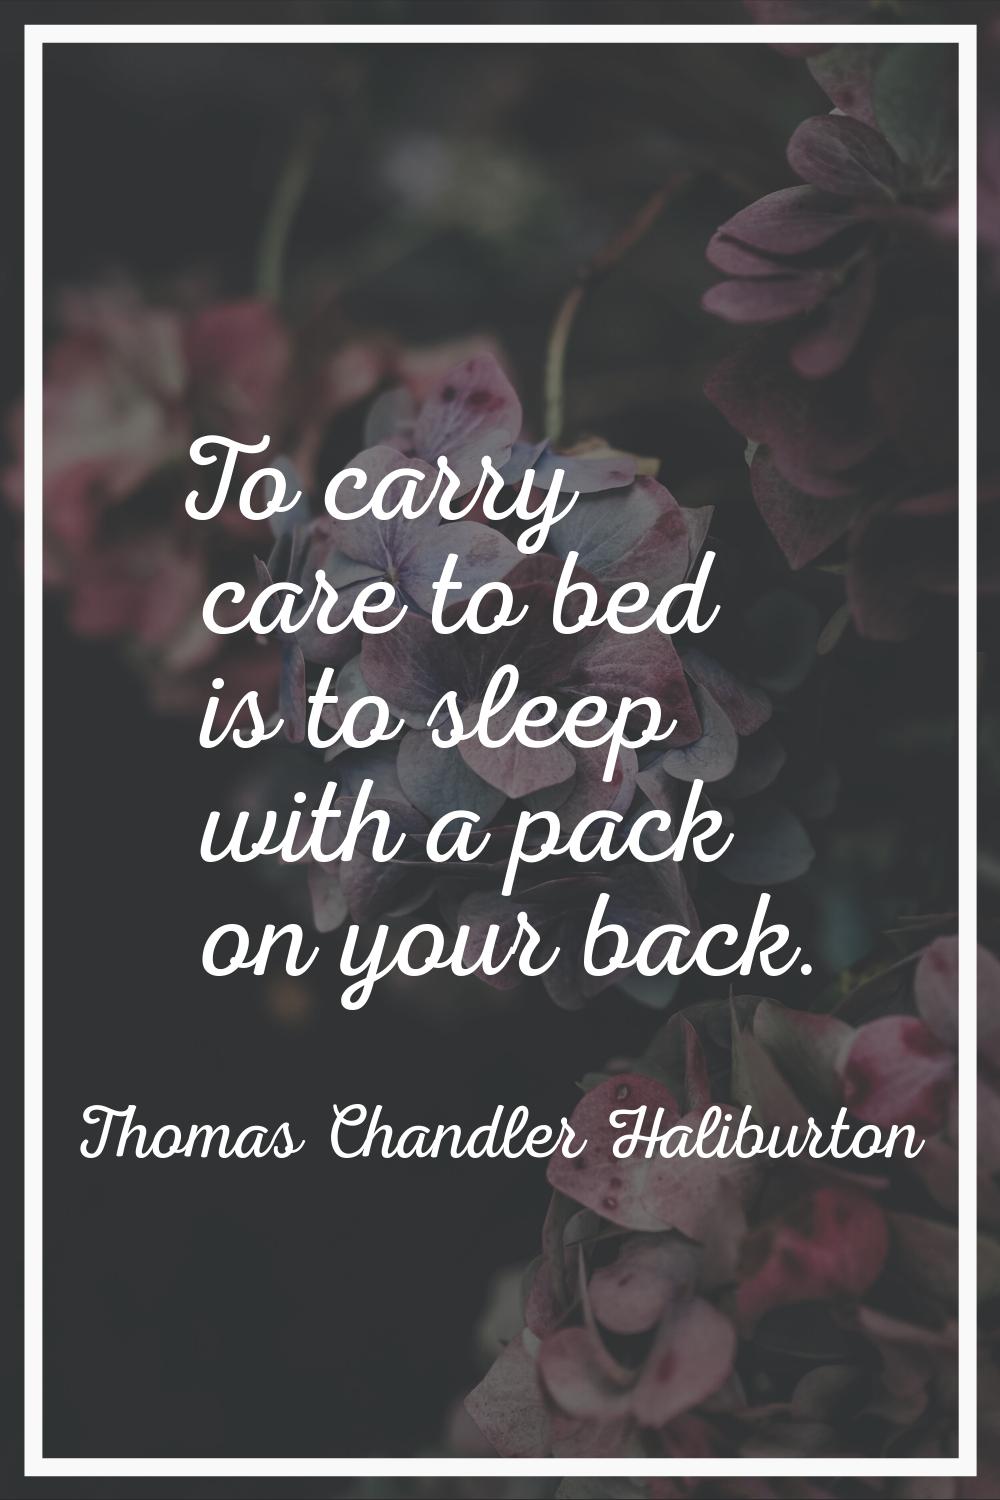 To carry care to bed is to sleep with a pack on your back.